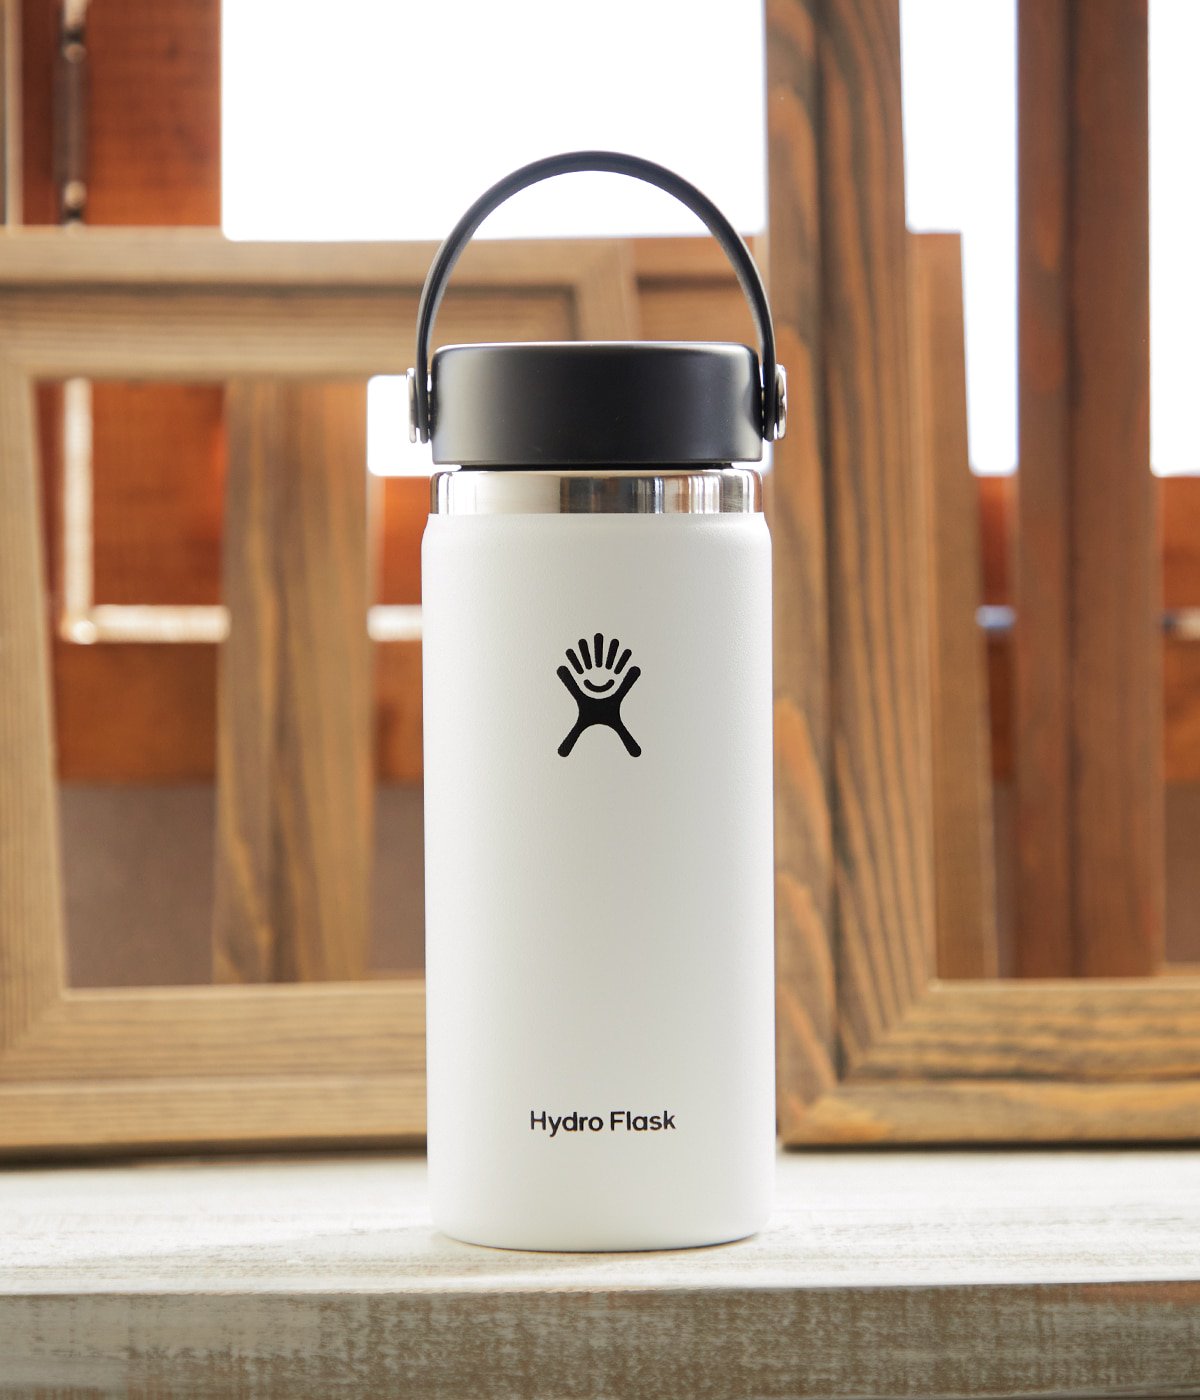 ONLY ARK】宇都宮大学×ARKnets×Hydro Flask コラボレーション 